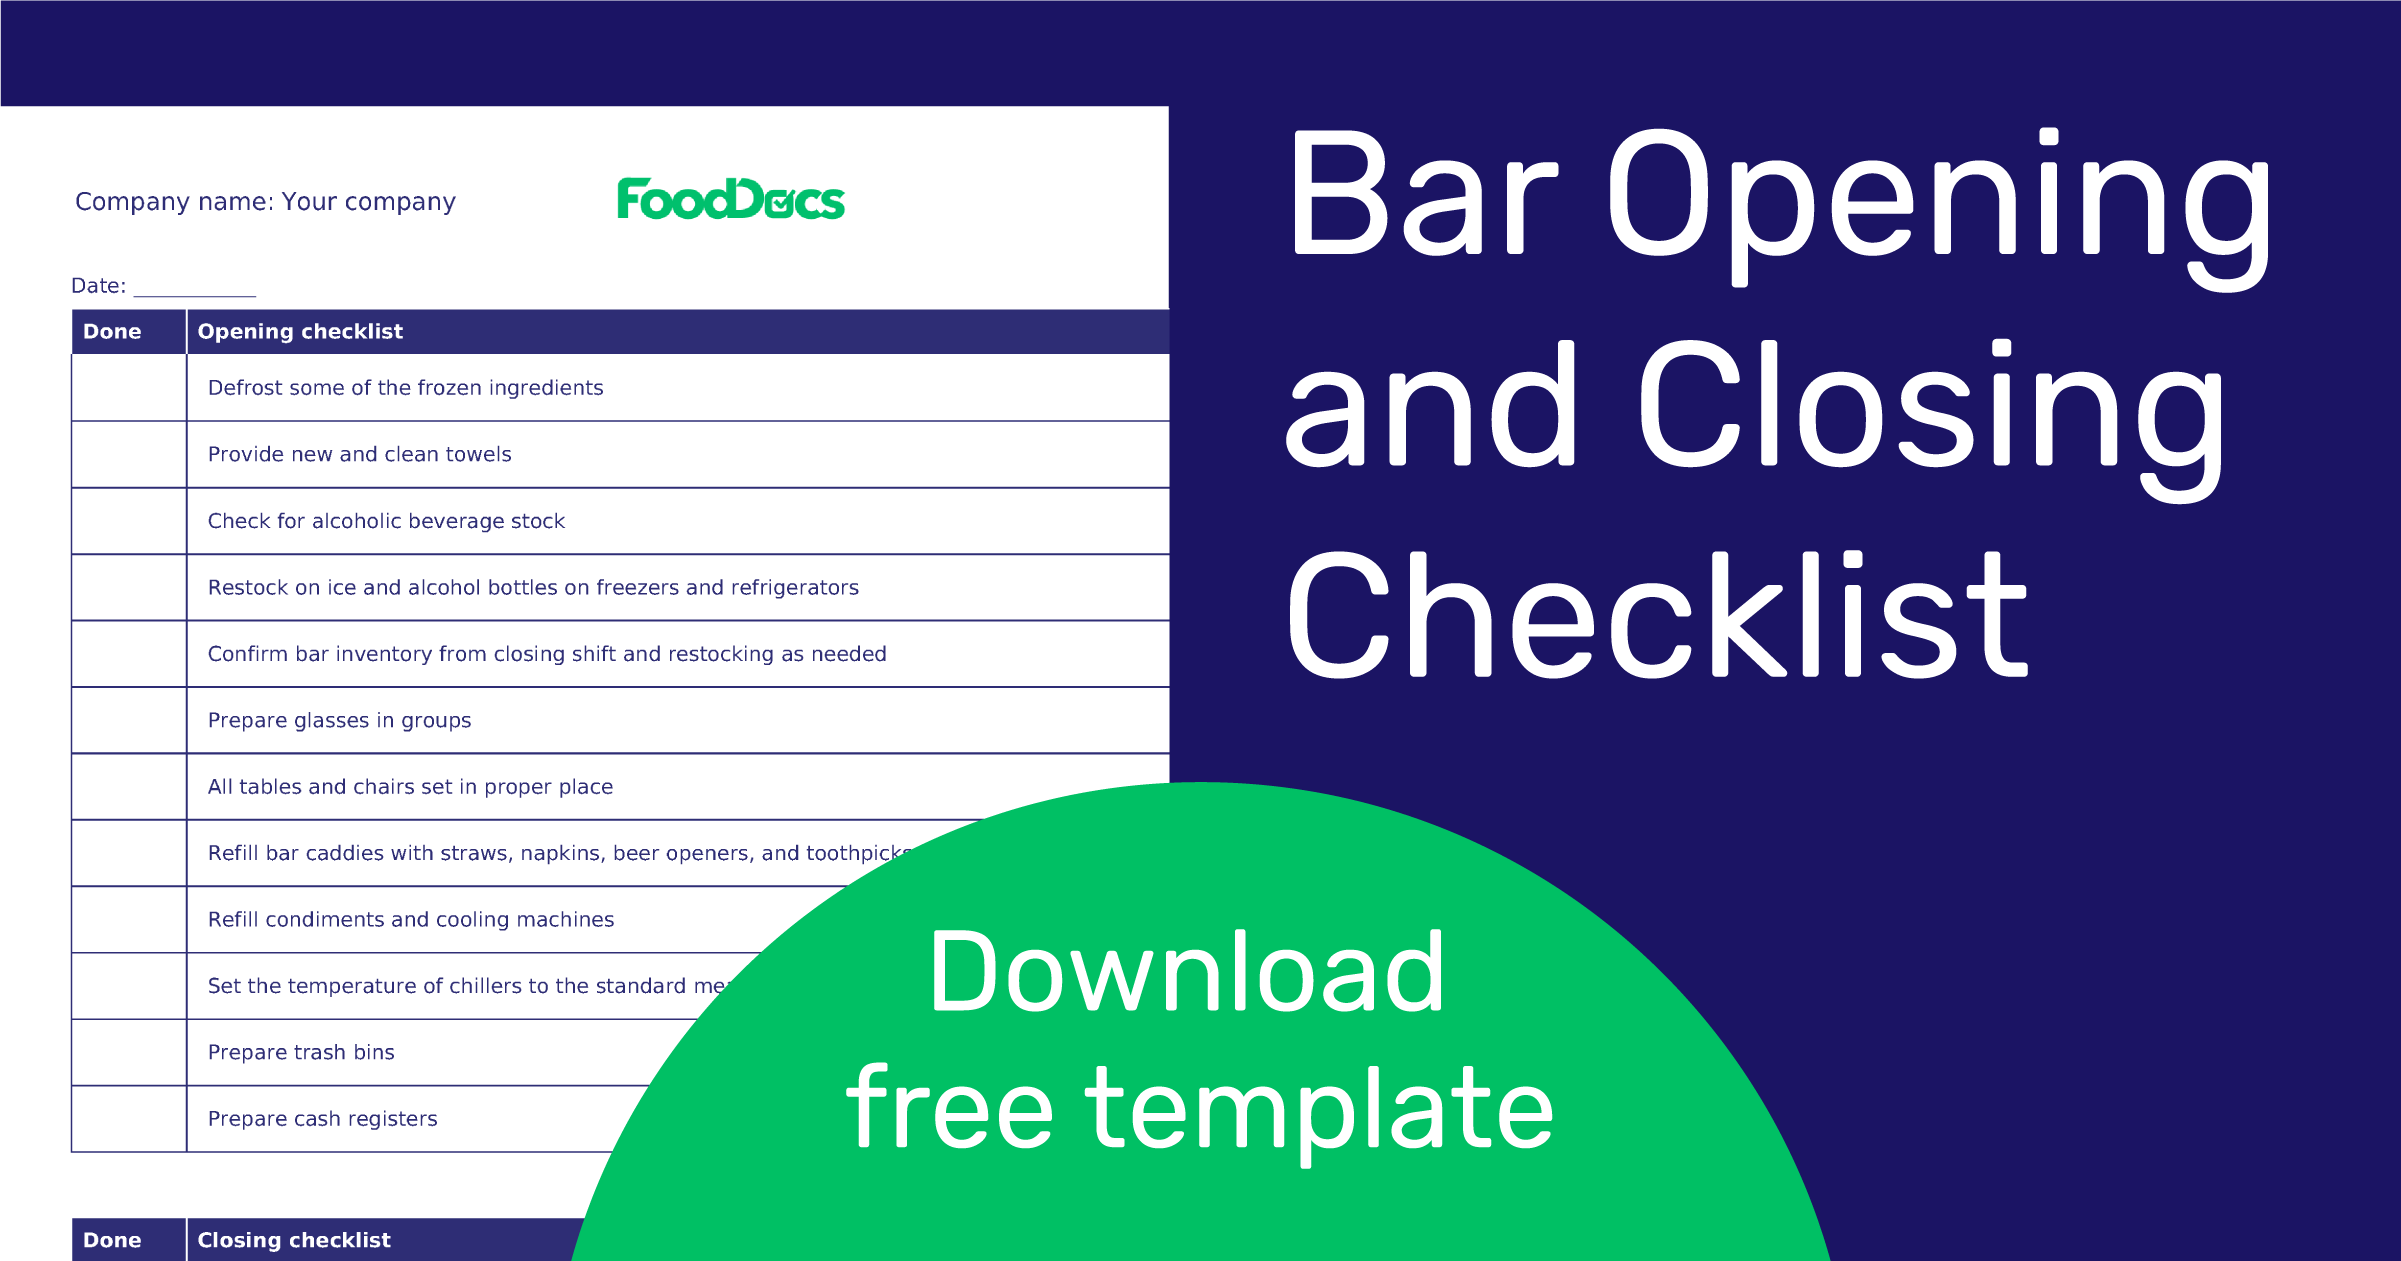 bar-opening-and-closing-checklist-download-free-template